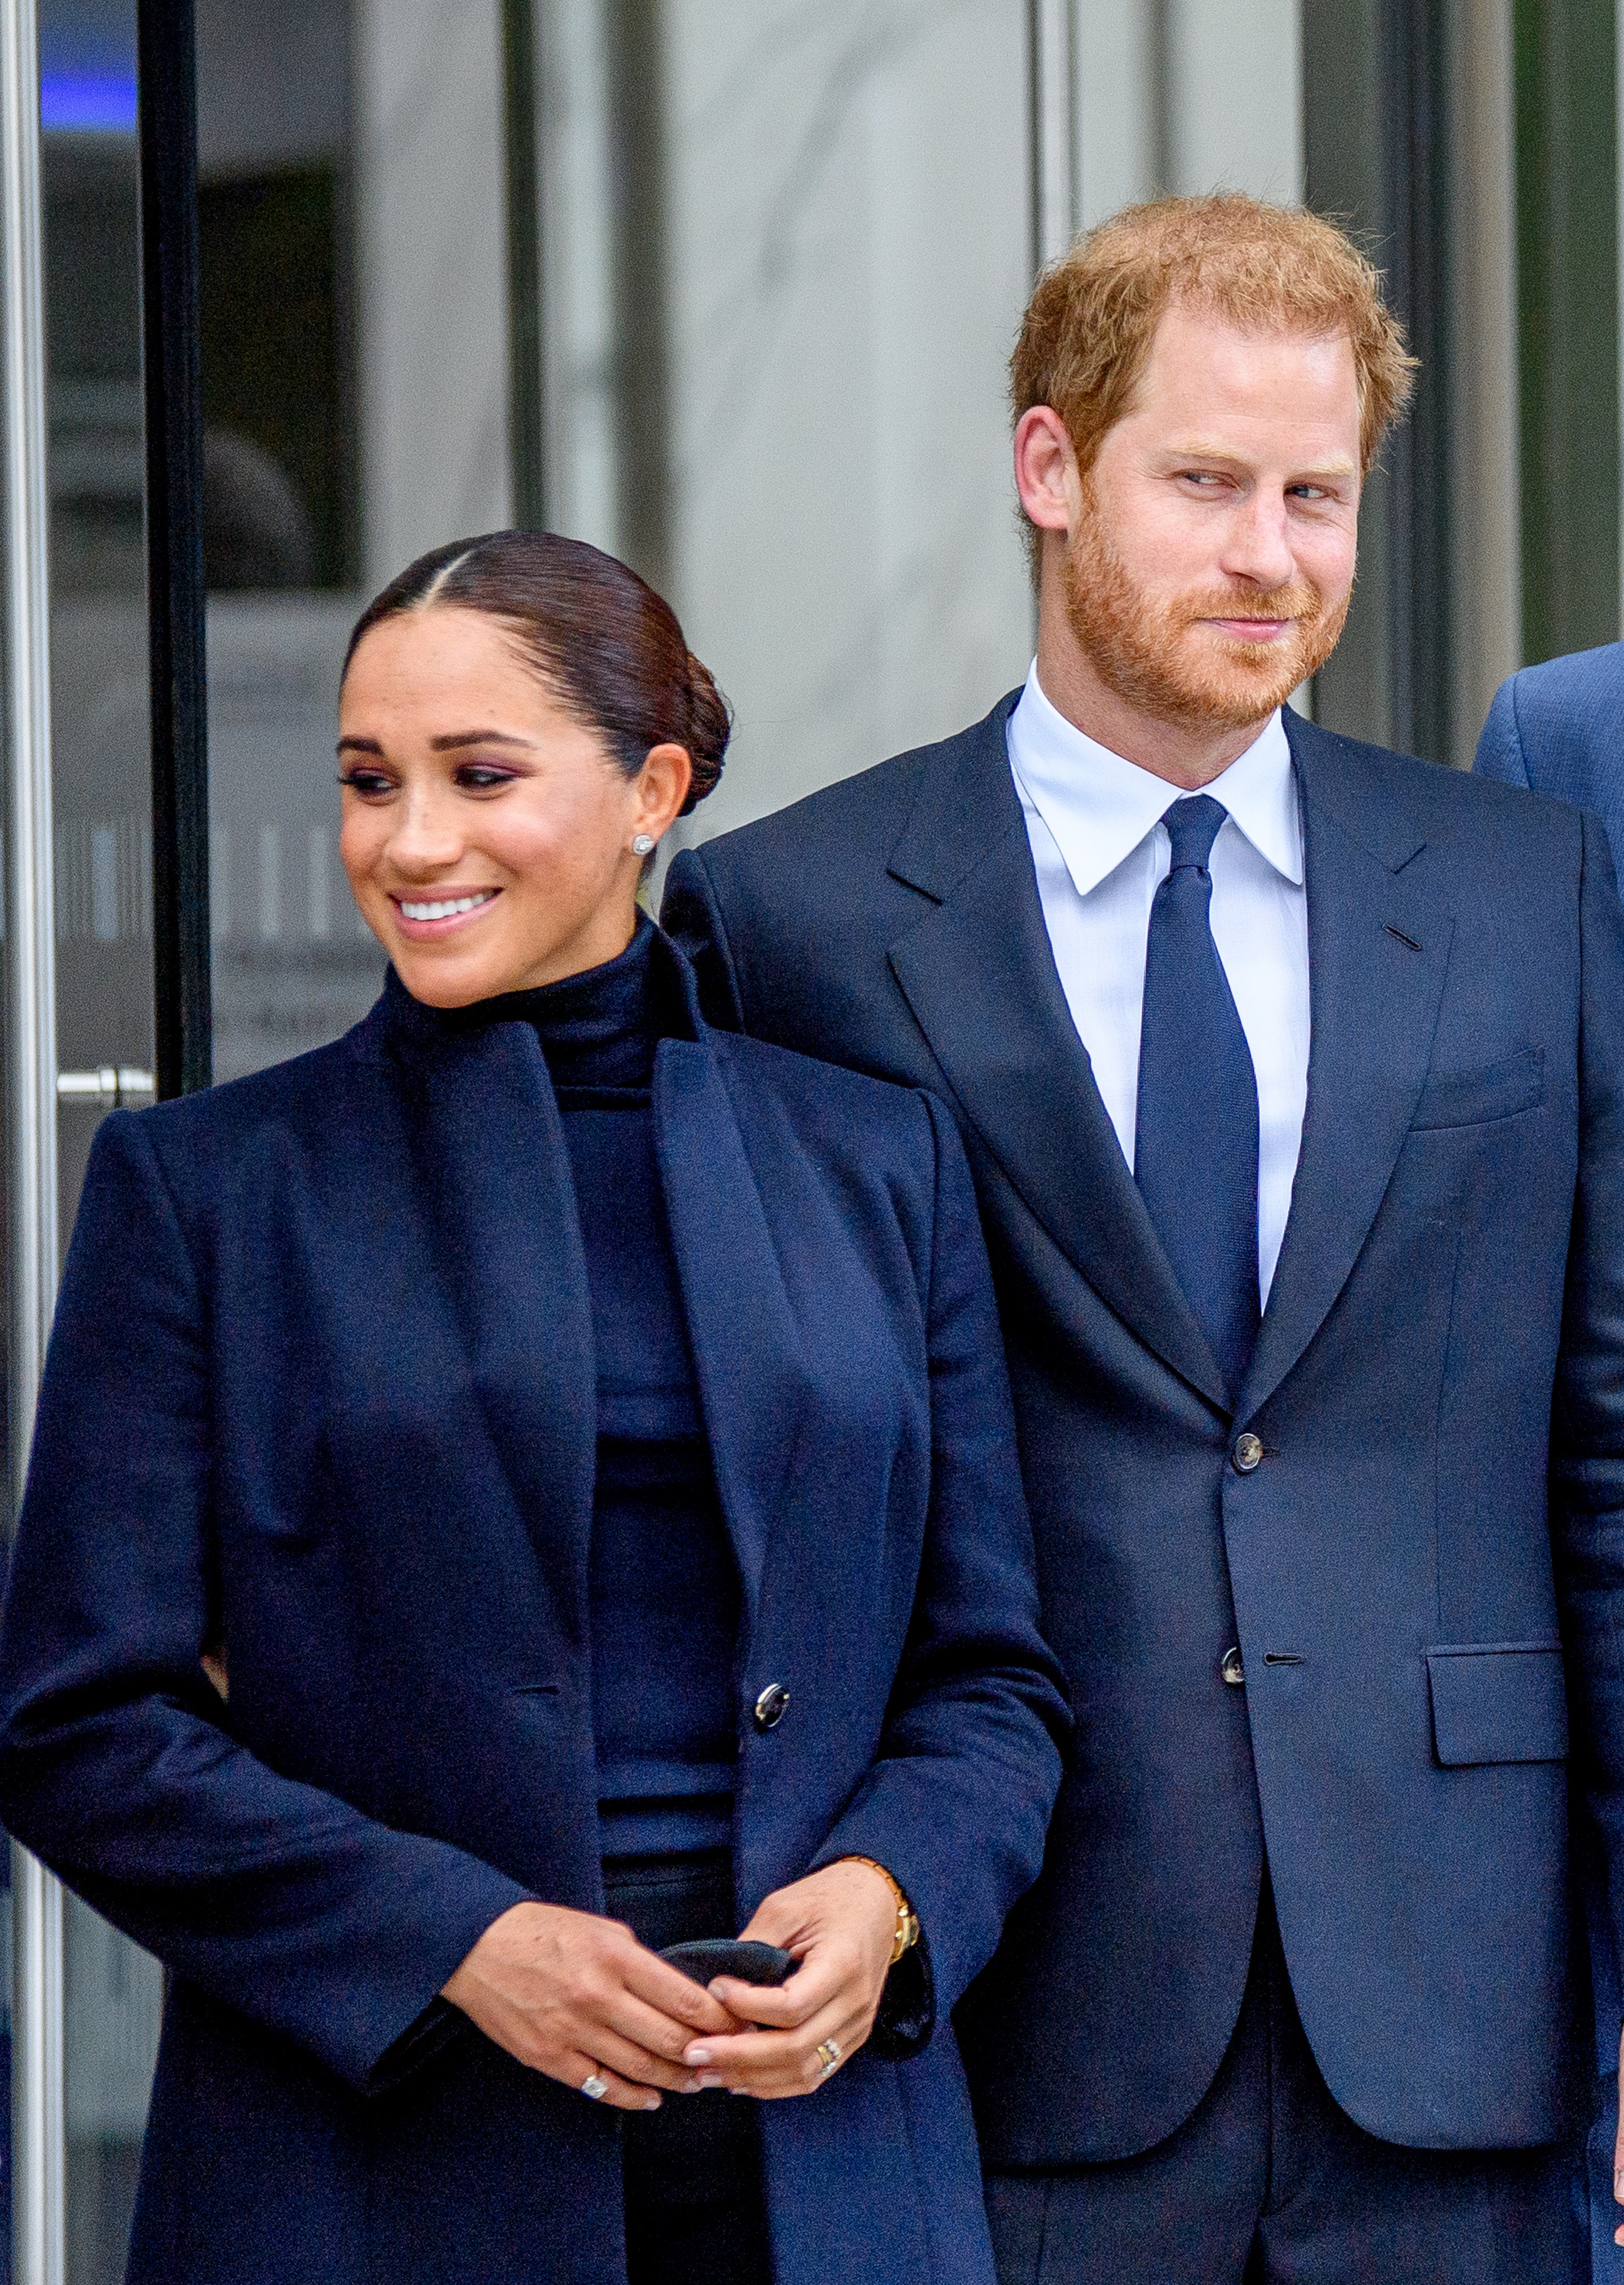 Meghan Markle and Prince Harry visit One World Observatory